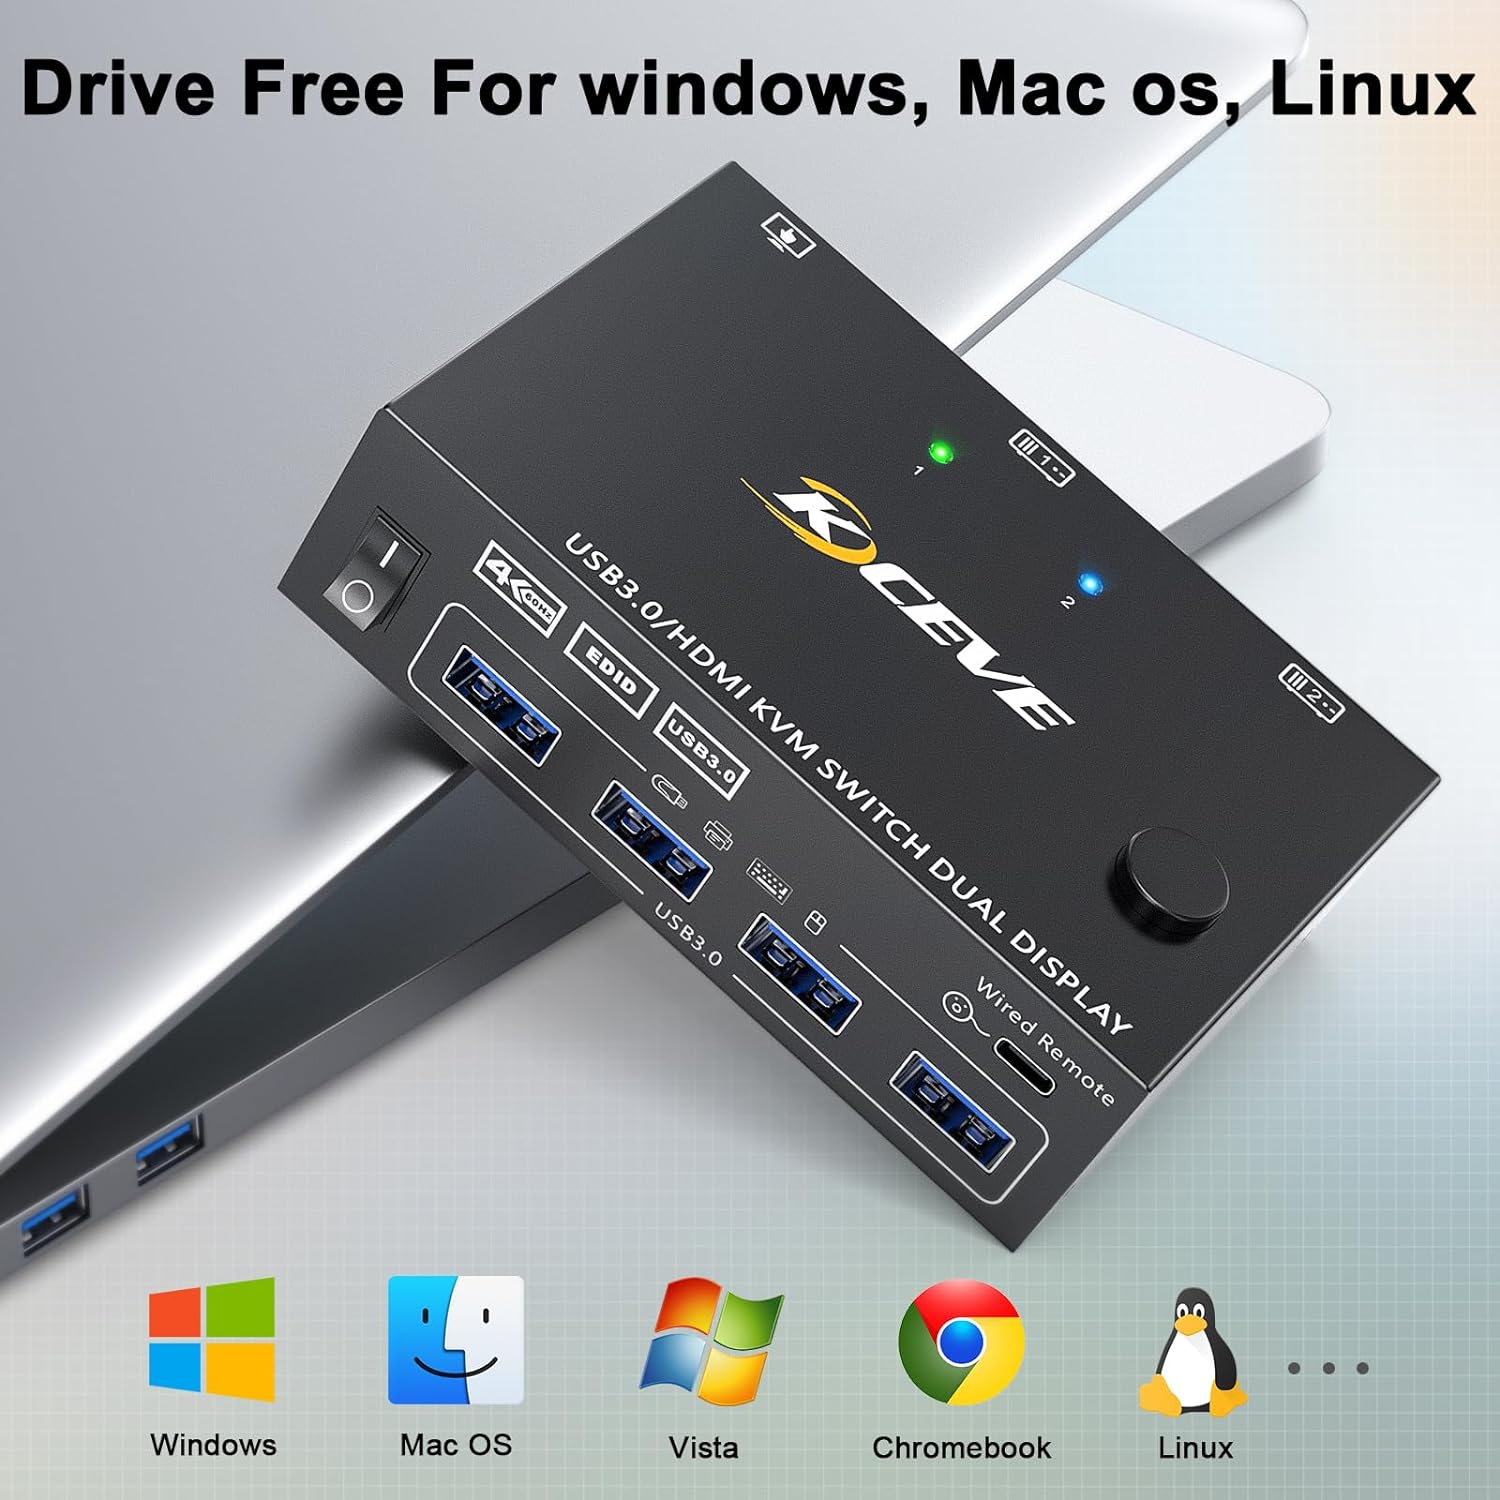 USB 3.0 HDMI KVM Switch 2 Monitors 2 Computers 4K@60Hz 2K@144Hz, EDID Emulator, Camgeet Dual Monitor KVM Switch for 2 Computers Share 2 Displays and 4 USB 3.0 Ports,Wired Remote and Cables Included